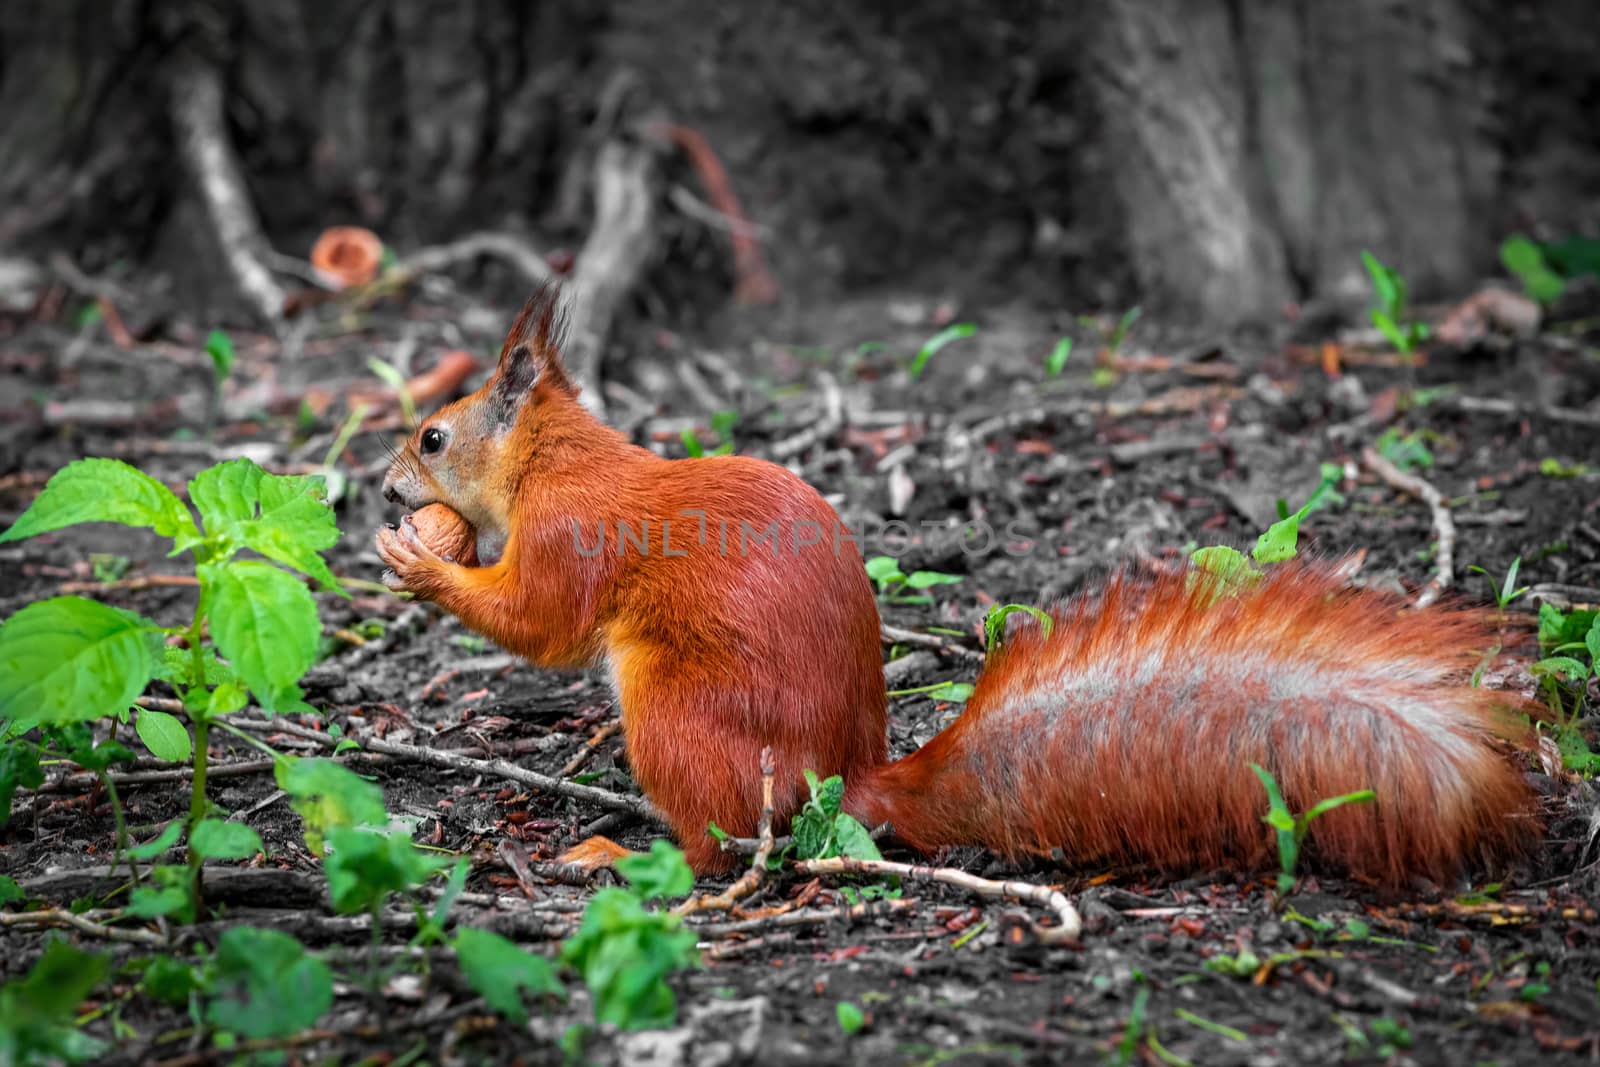 Cute red wild squirrel eating a walnut in the park. Close-up view